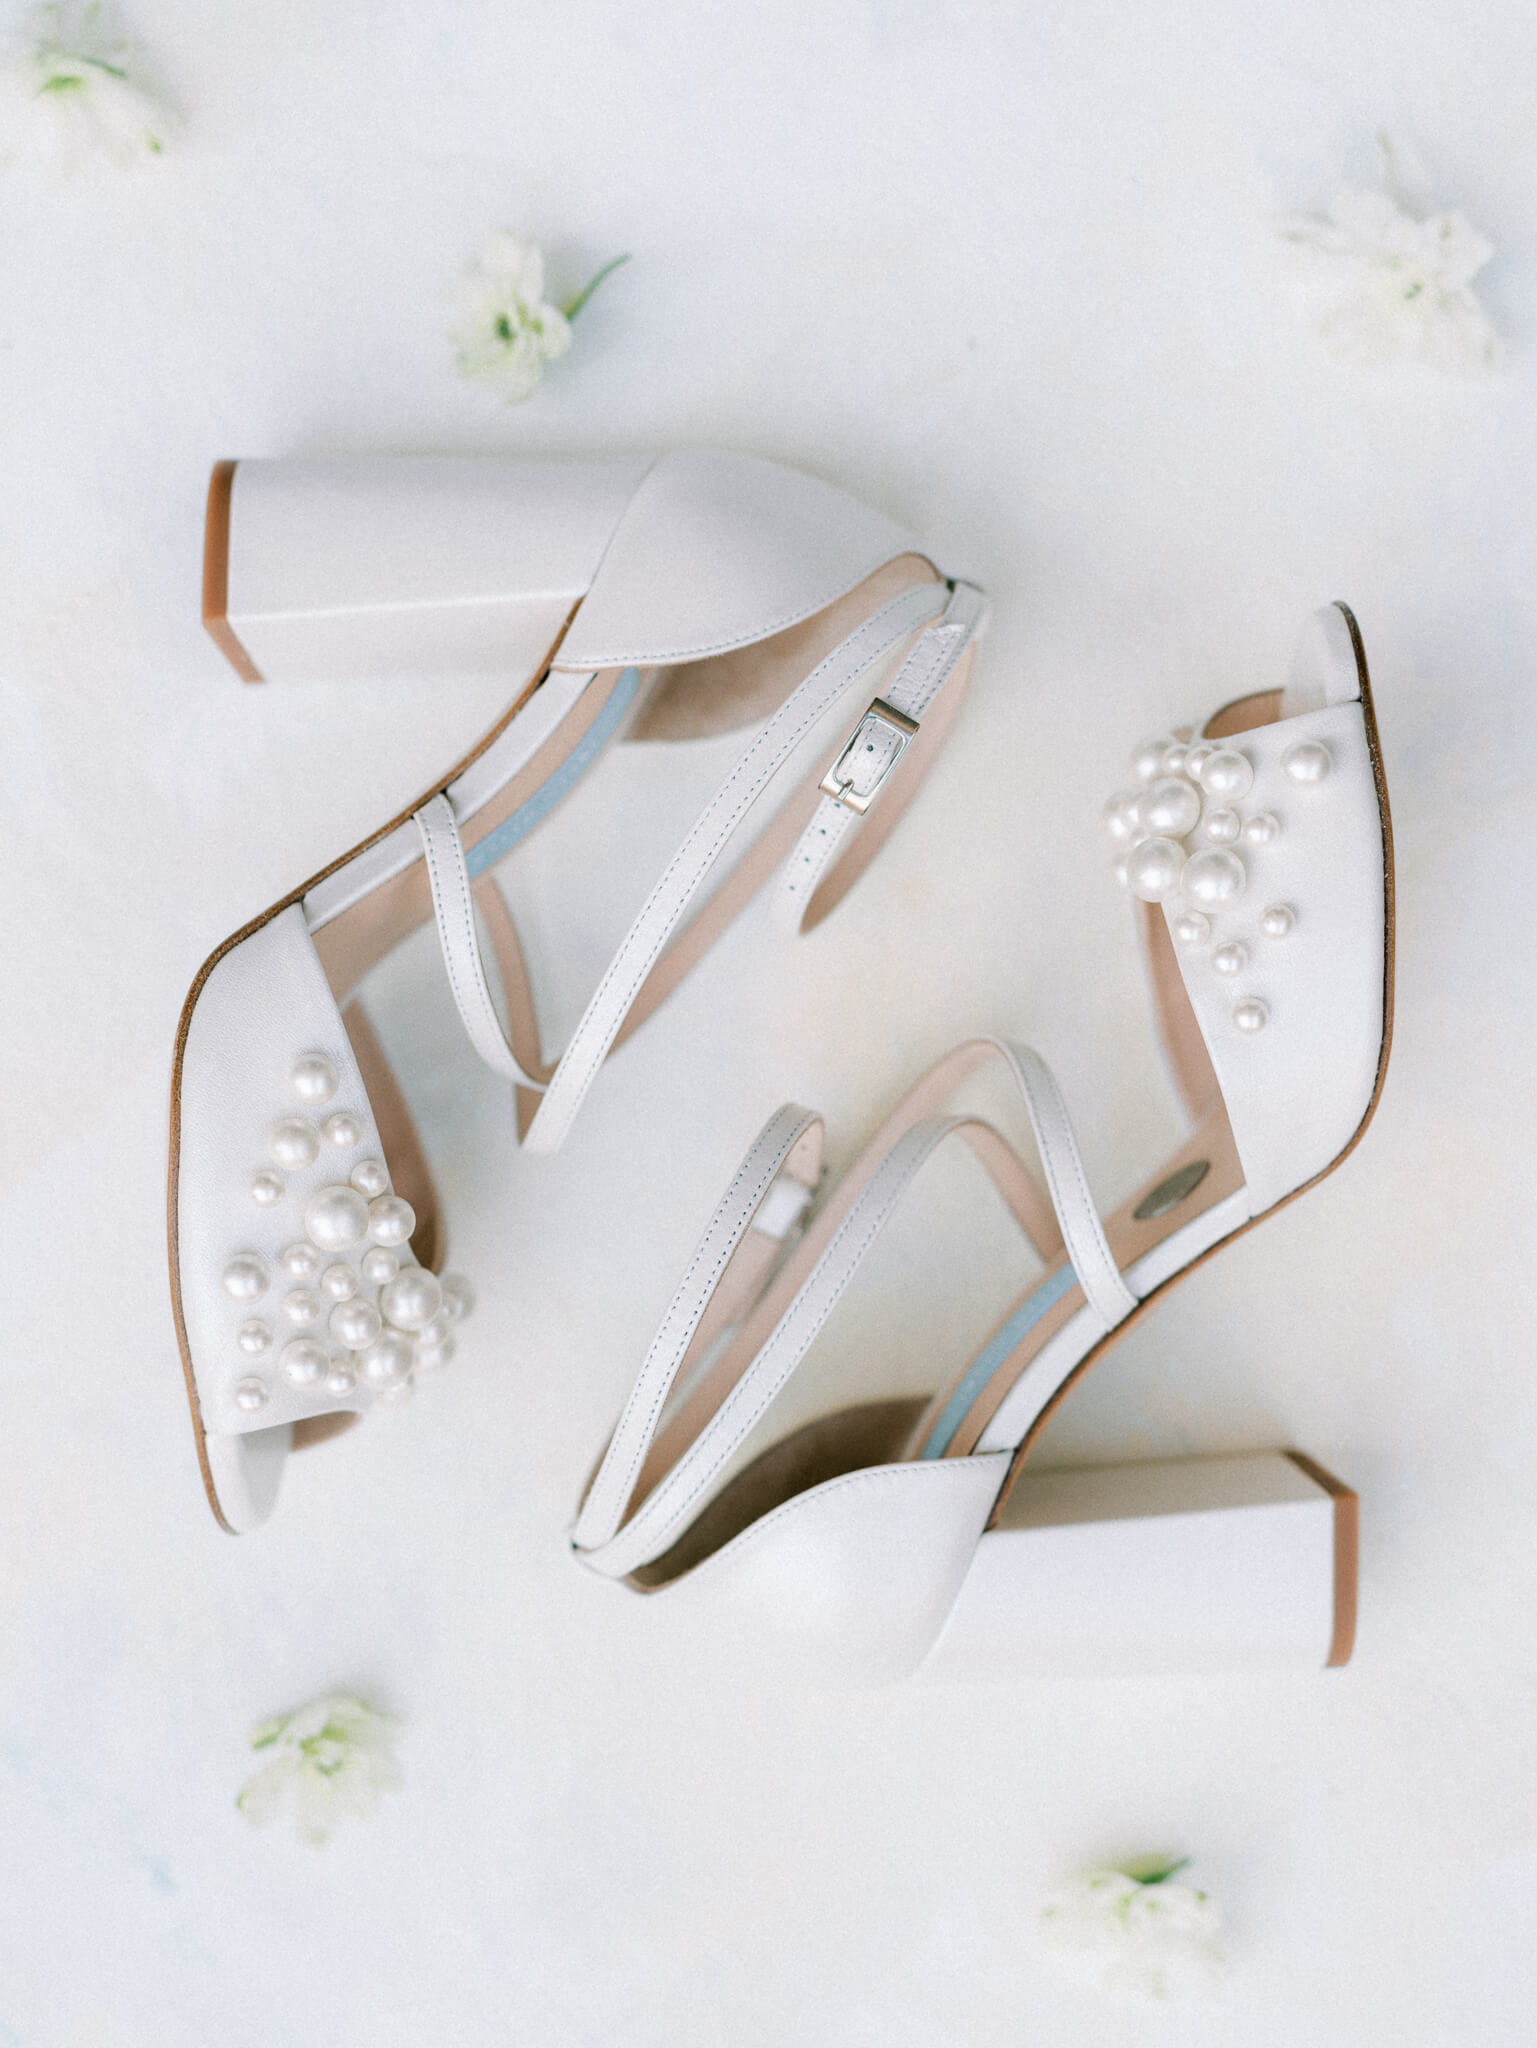 Flatlay of a pair of white bridal heels with pearls on a white background with white flowers.